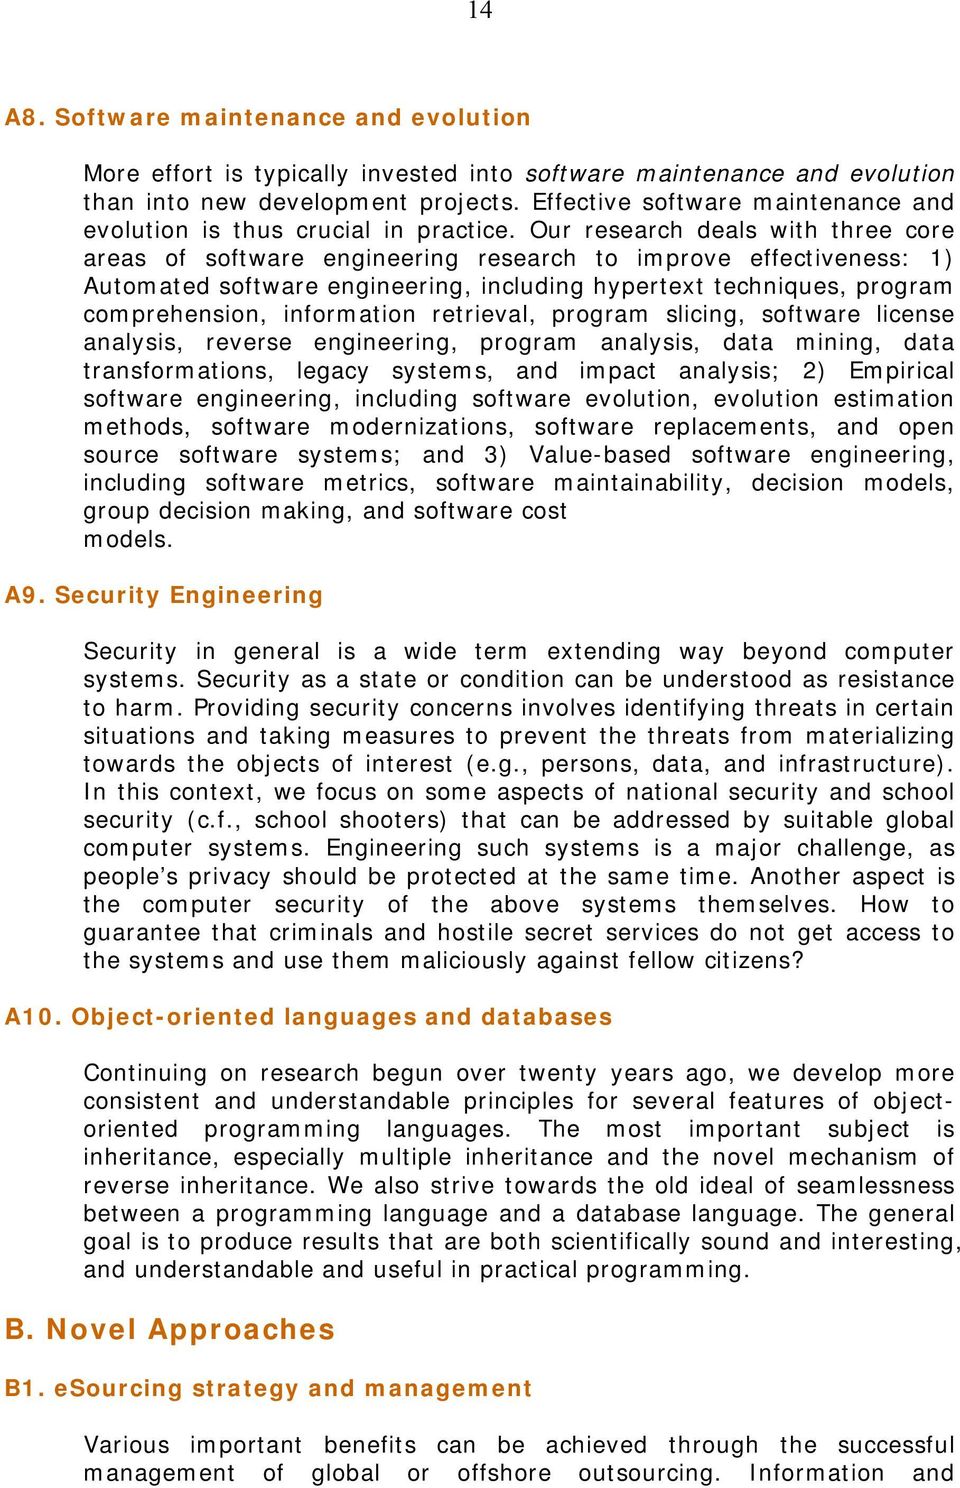 Our research deals with three cre areas f sftware engineering research t imprve effectiveness: 1) Autmated sftware engineering, including hypertext techniques, prgram cmprehensin, infrmatin